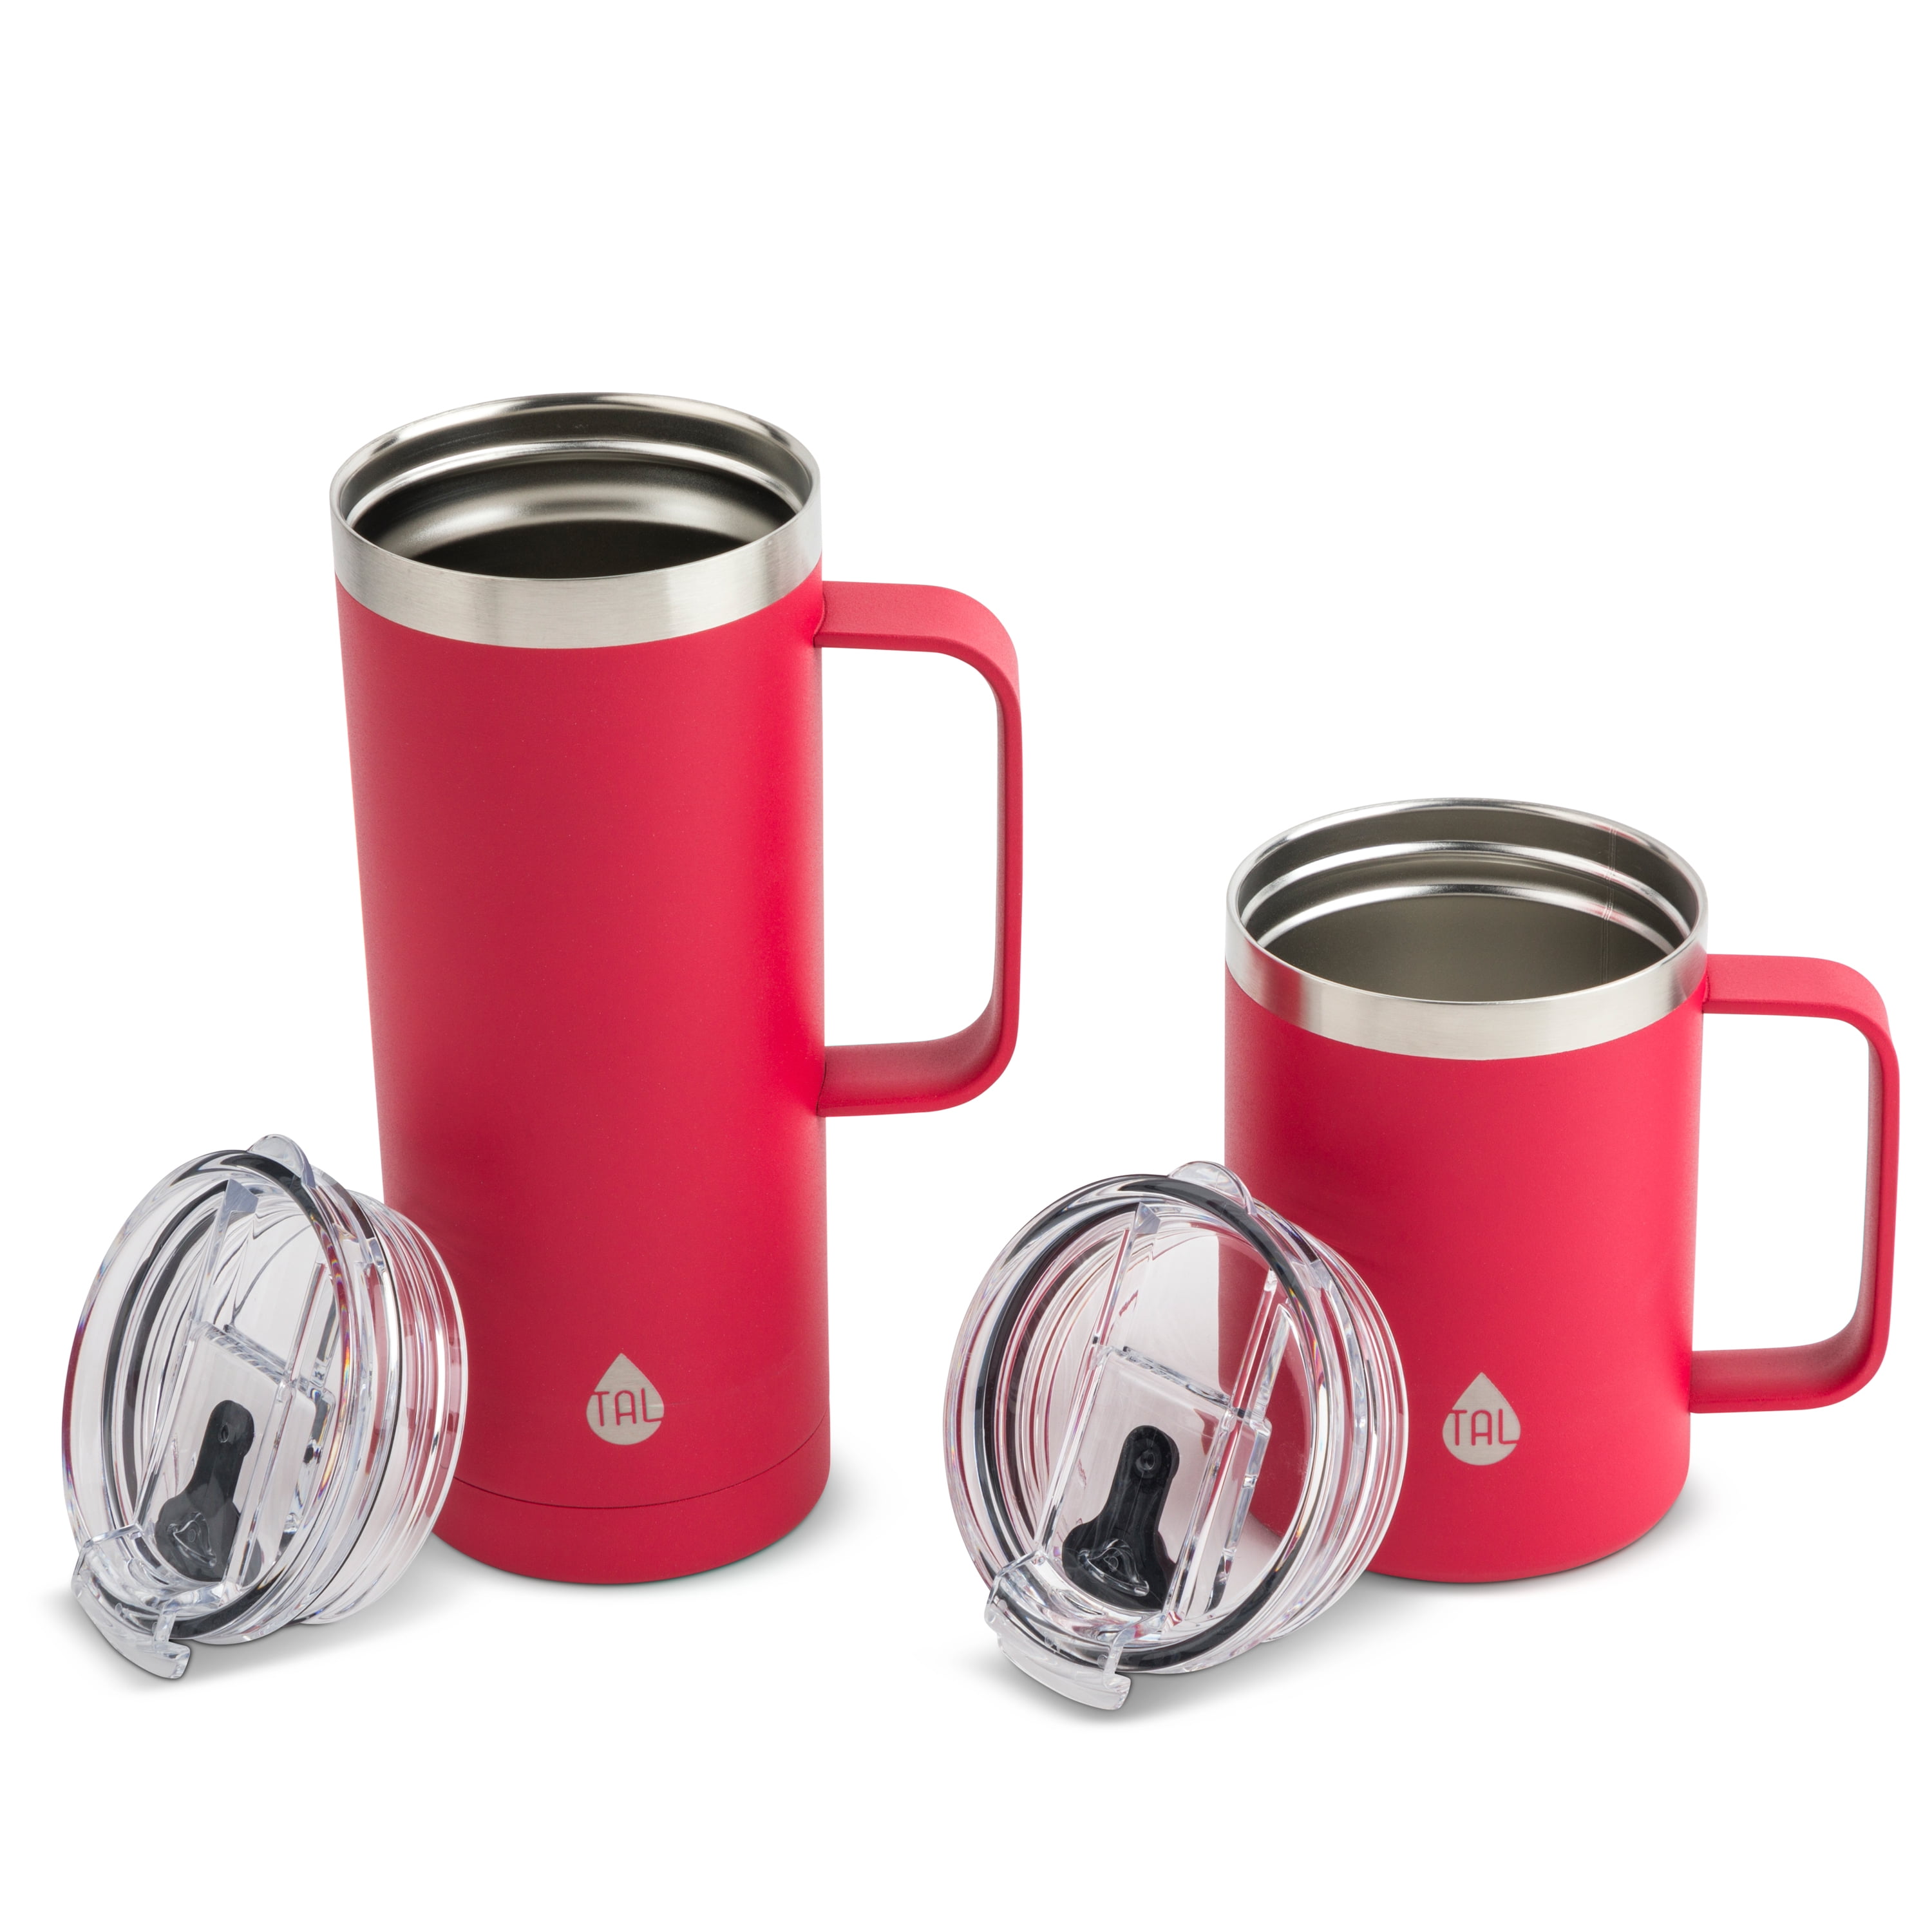 Cool Gear 2-Pack American Designed, Stainless Steel Copper Lined Mug w